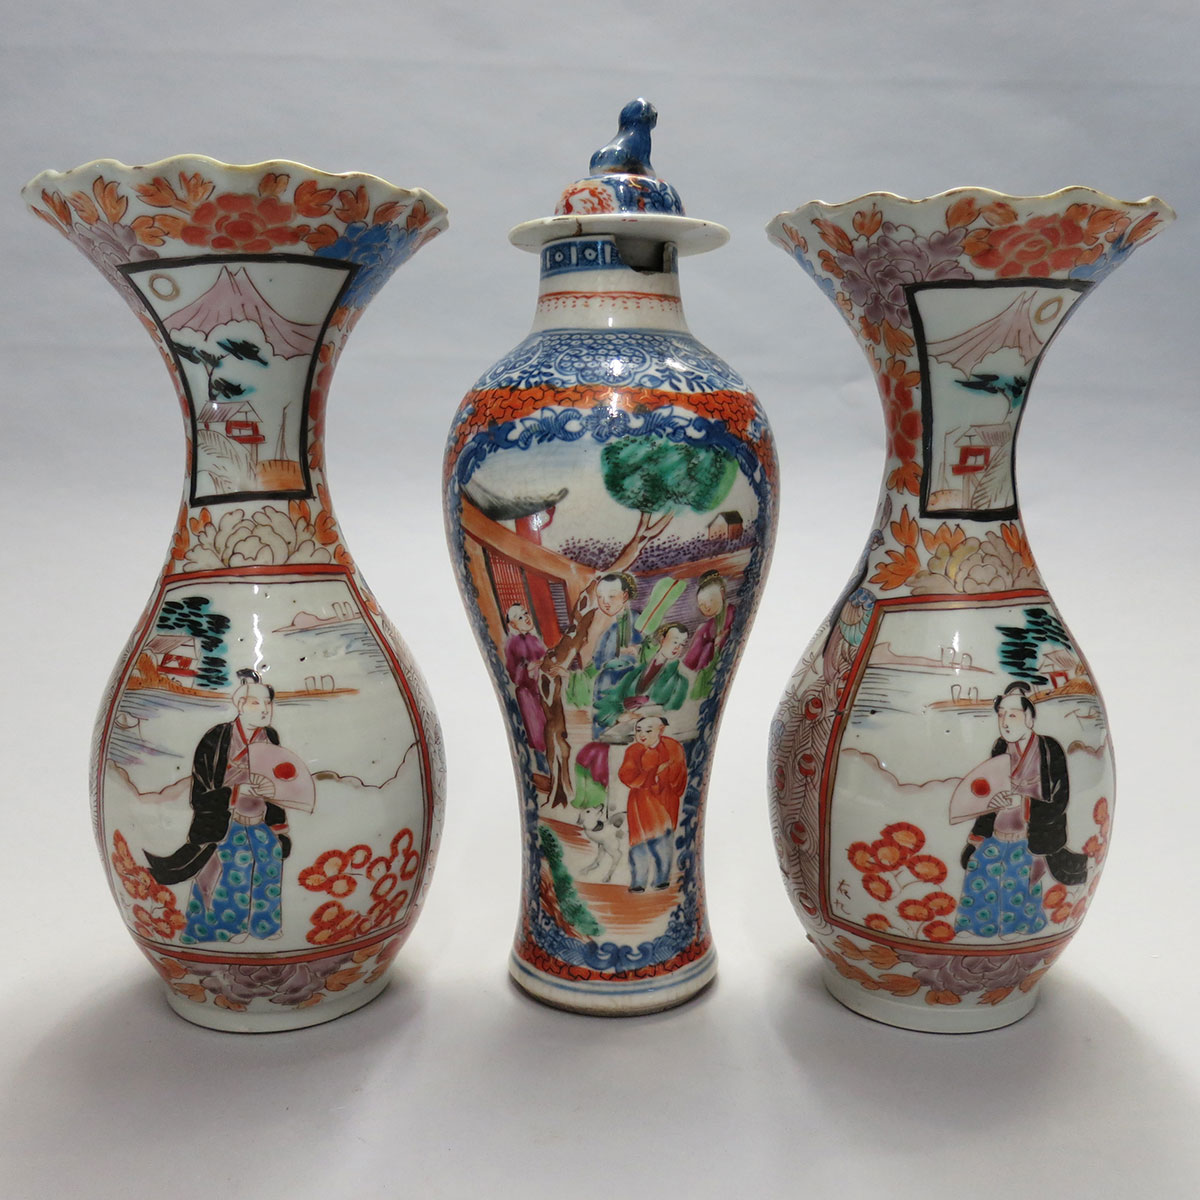 Export Canton Rose Baluster Vase and Cover, 18th Century